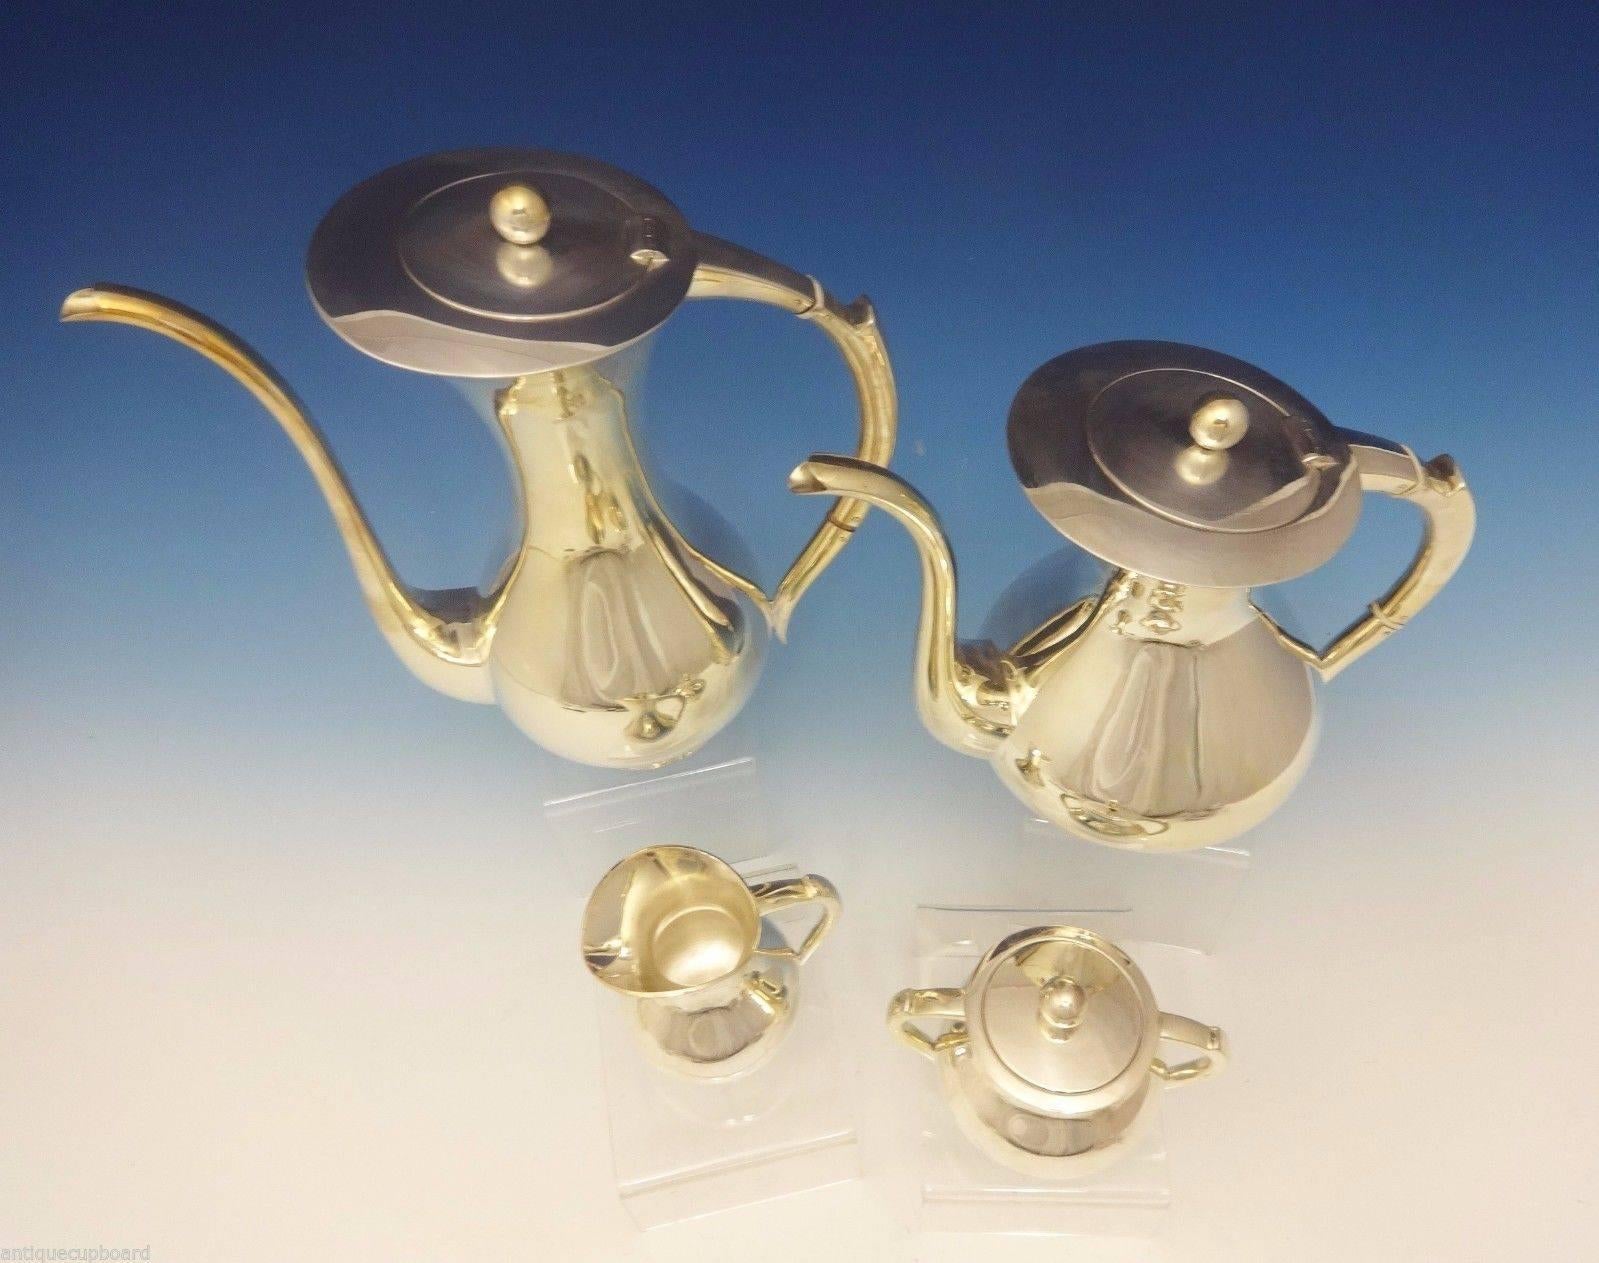 Emil Hermann
 
This Mid-Century modernistic four-piece sterling silver tea set was made by Emil Hermann of Germany circa 1921-1950s. The pieces are modernistic with ball finials. The set includes: 

Coffee pot: Measures 10 3/4